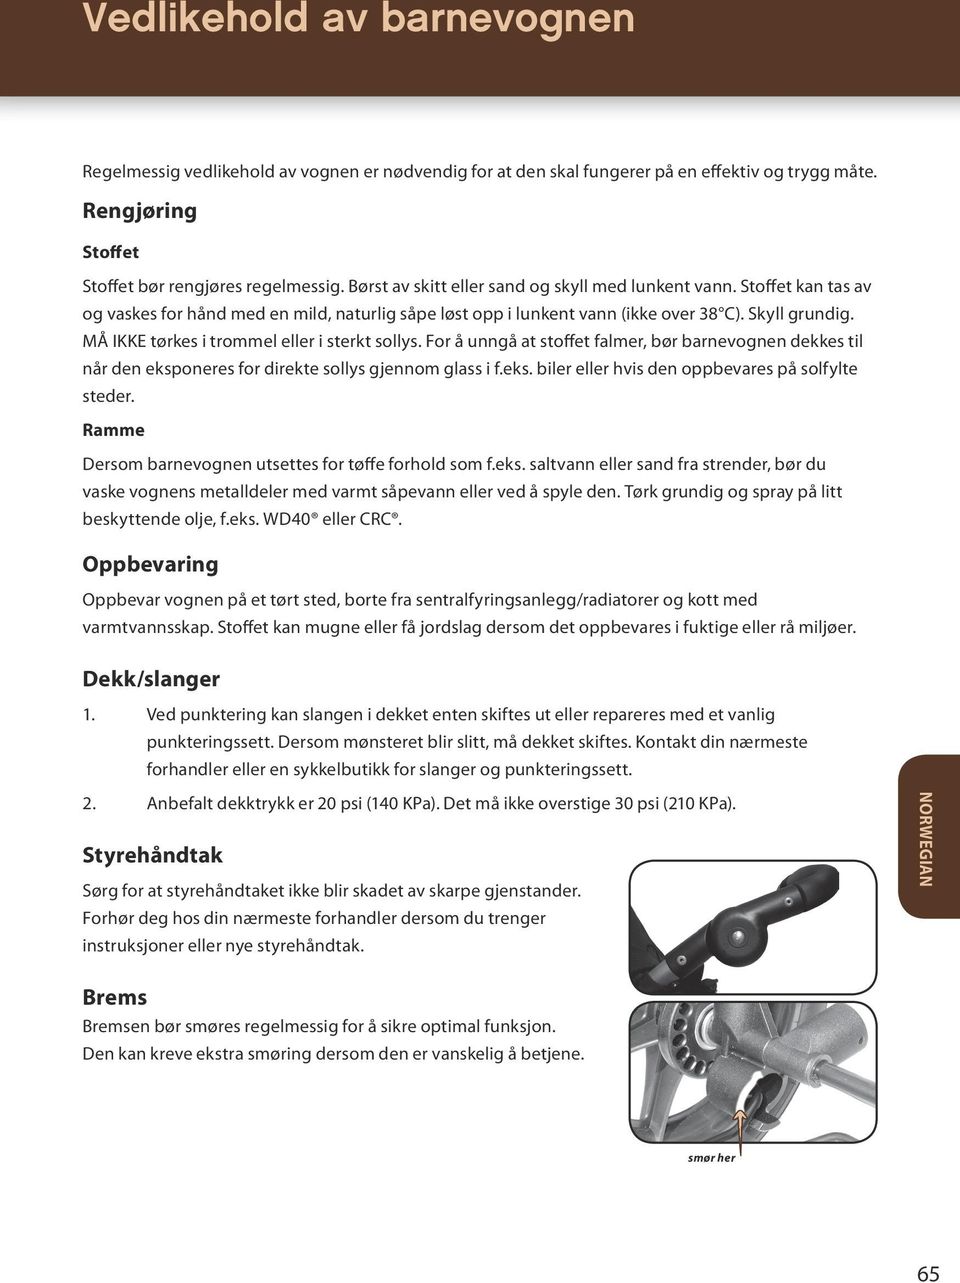 Norwegian. mountain buggy. buggy instruction guide. life without limit. For  all Mountain Buggy models: swift urban jungle duo terrain - PDF Gratis  nedlasting